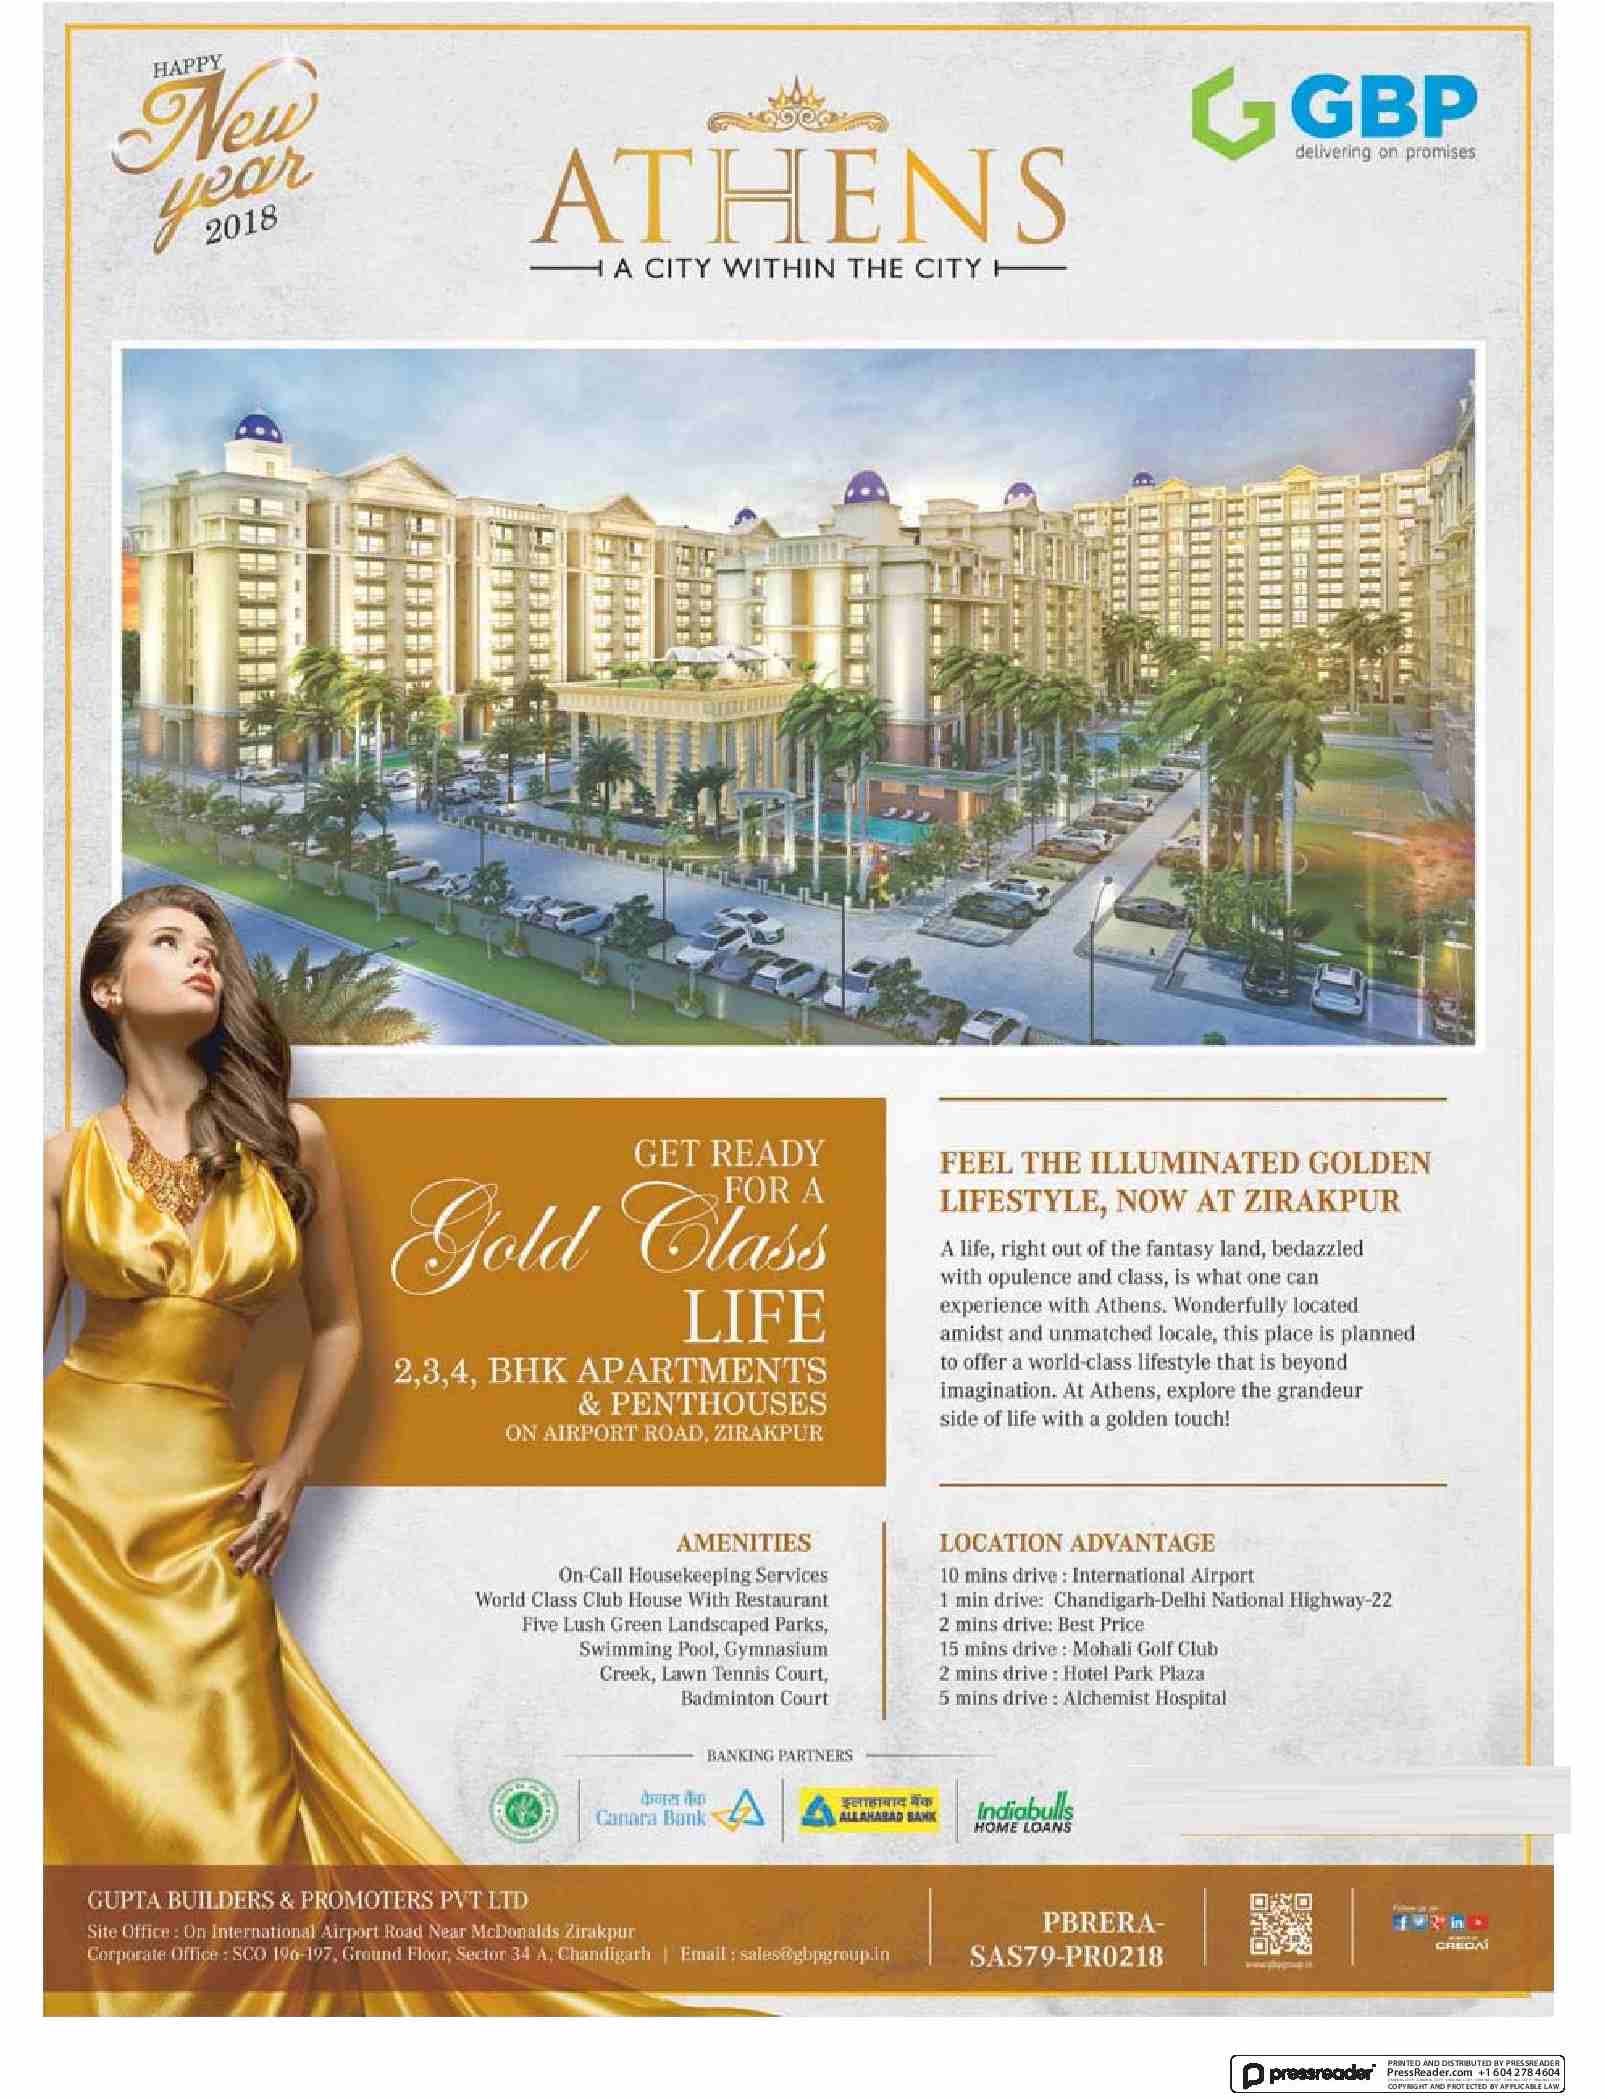 Feel the illuminated golden lifestyle now at GBP Athens in Chandigarh